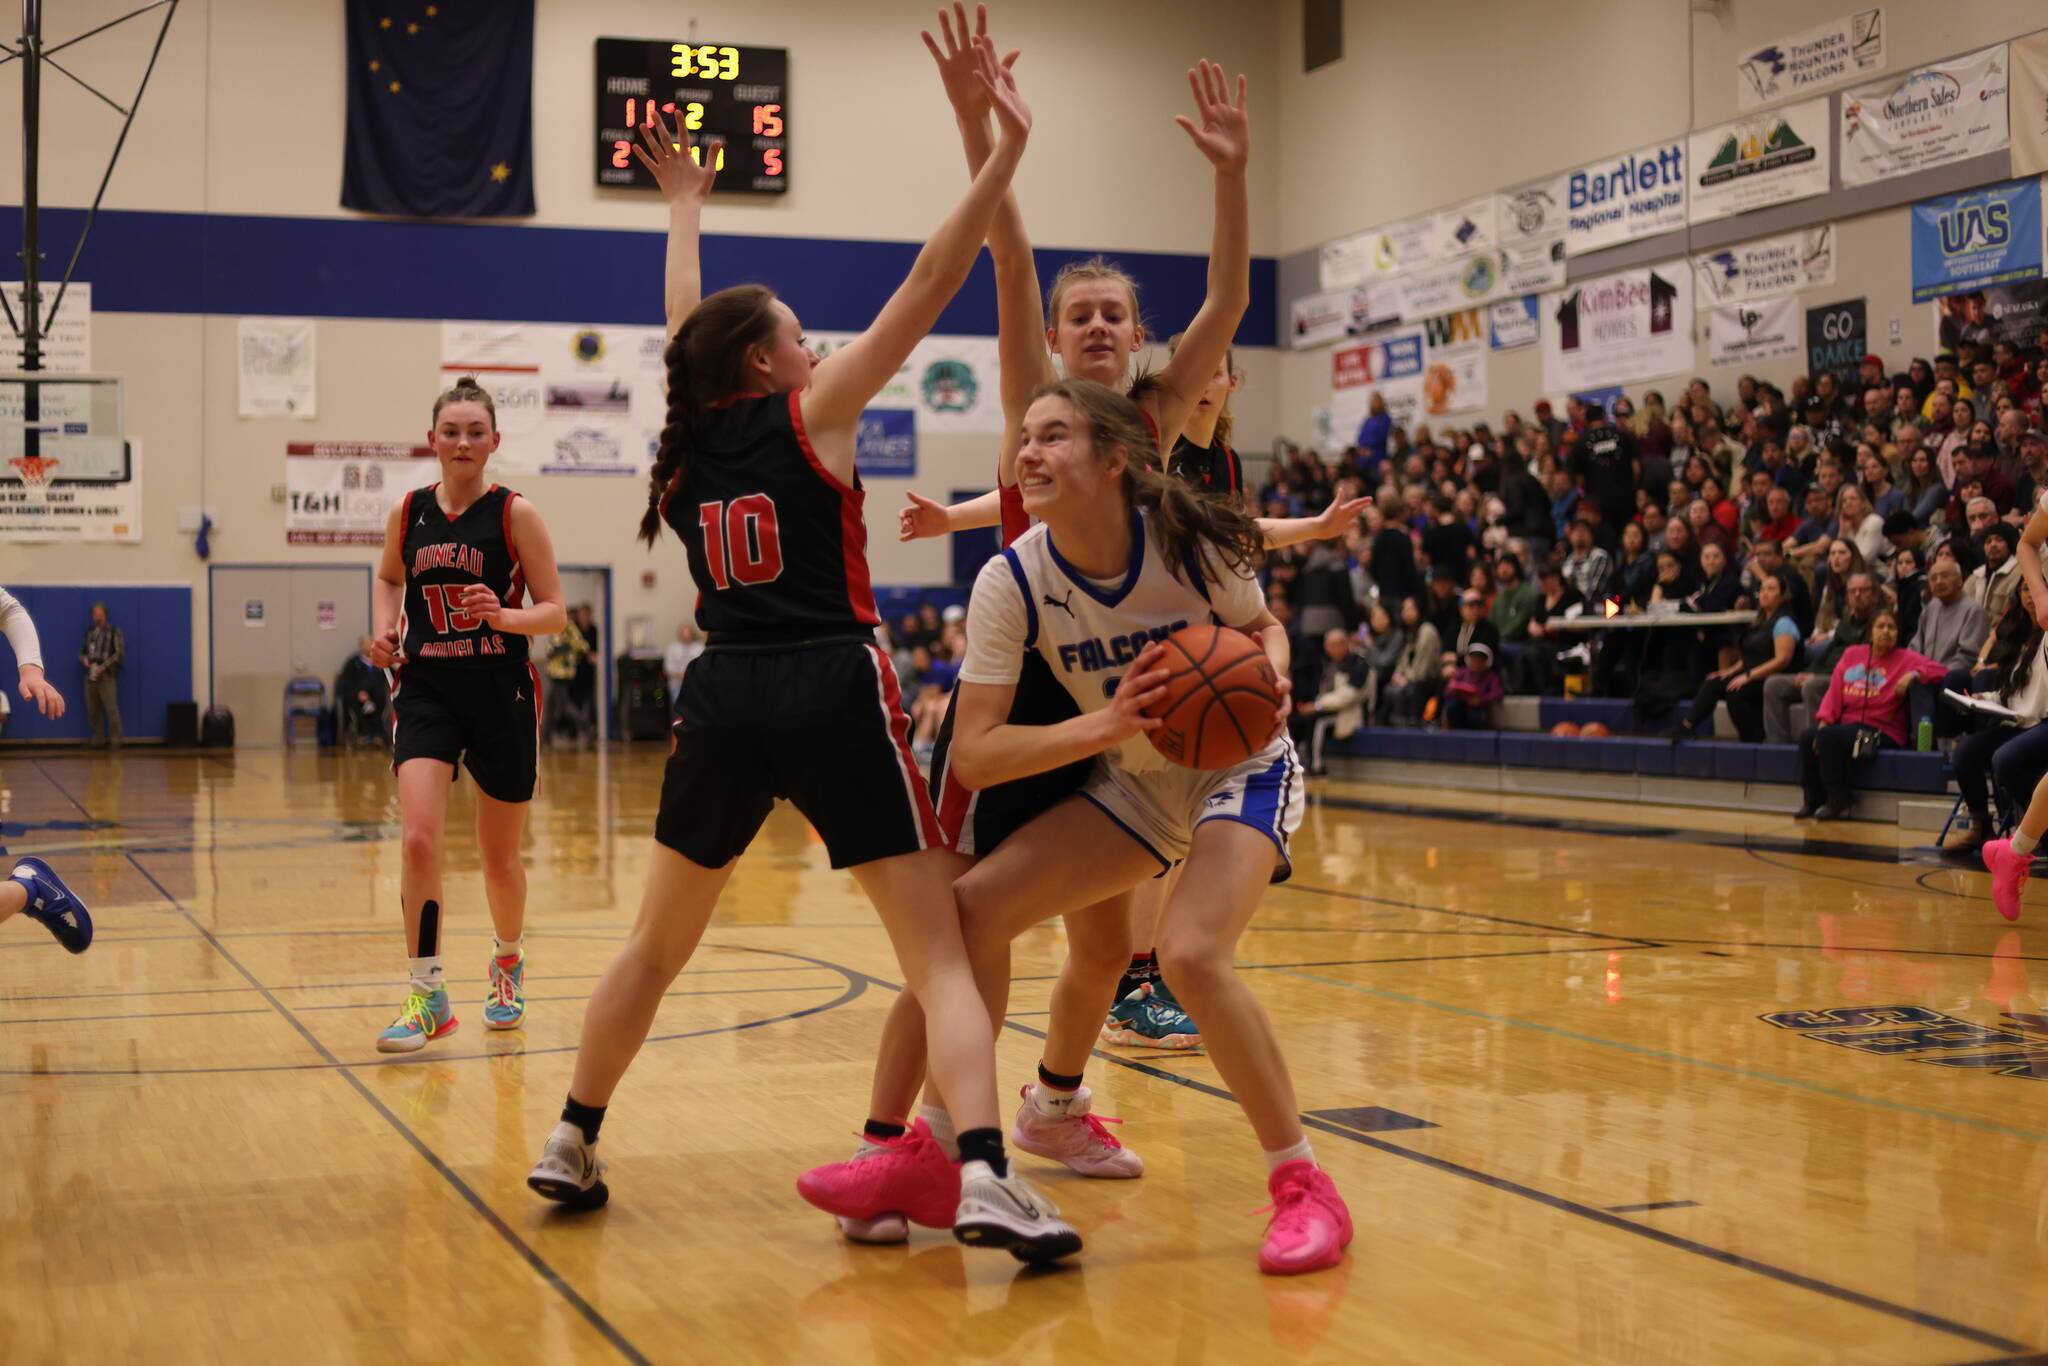 TMHS Kerra Baxter fights for the rebound against JDHS during Region V tournament play. The Lady Falcons won their game on Friday against Dimond in Anchorage as part of this year’s ASAA competition. TMHS will now face off against JDHS on Saturday. (Ben Hohenstatt / Juneau Empire File)